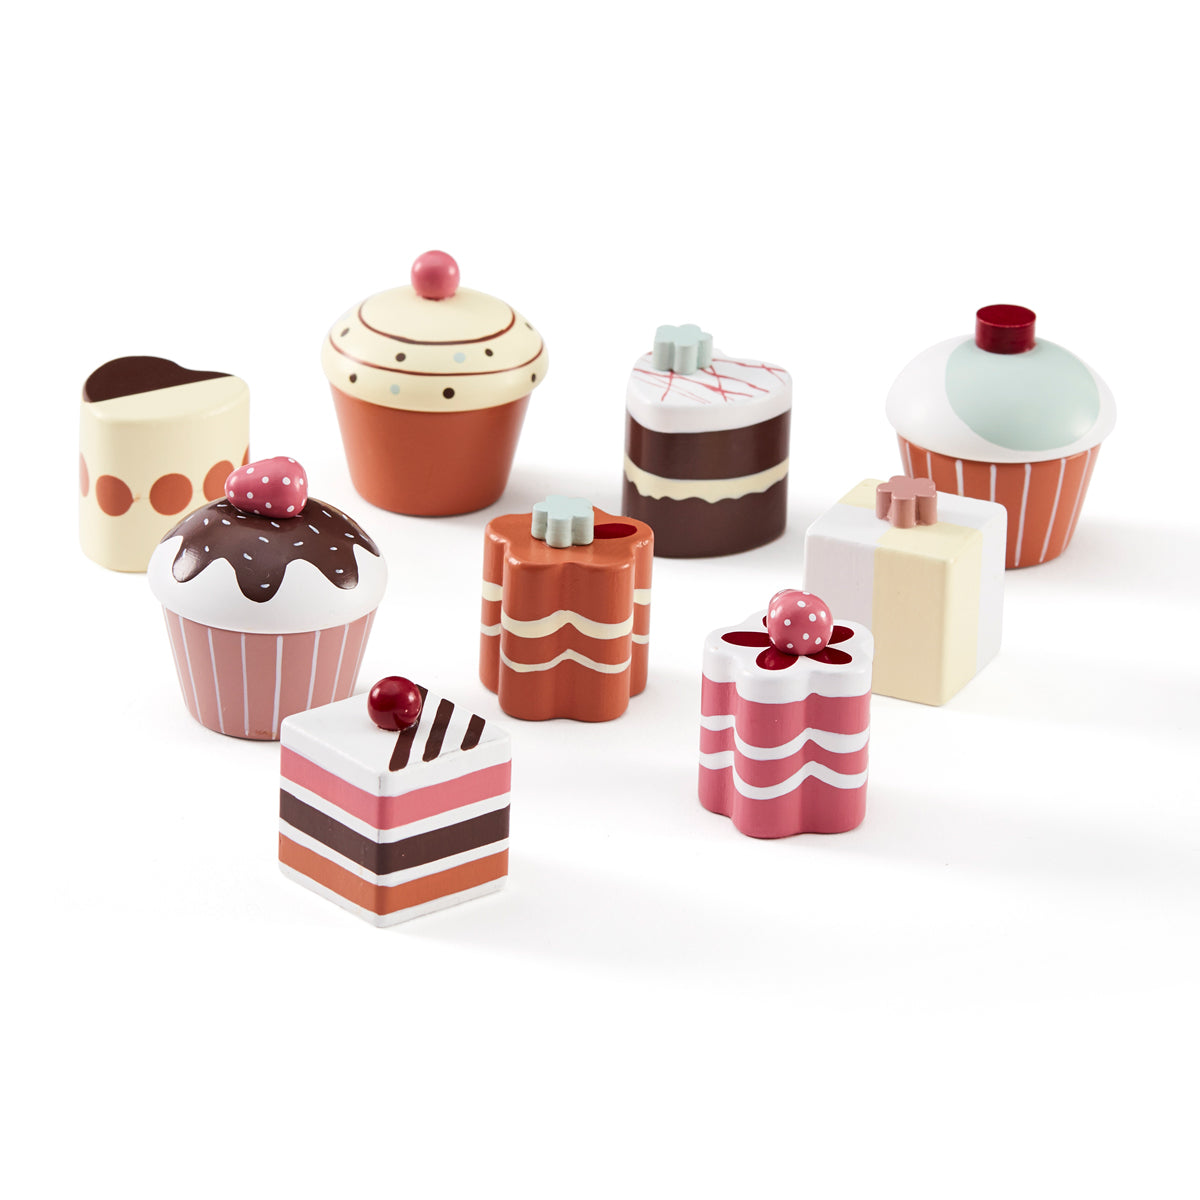 Kids Concept wooden pastries cakes